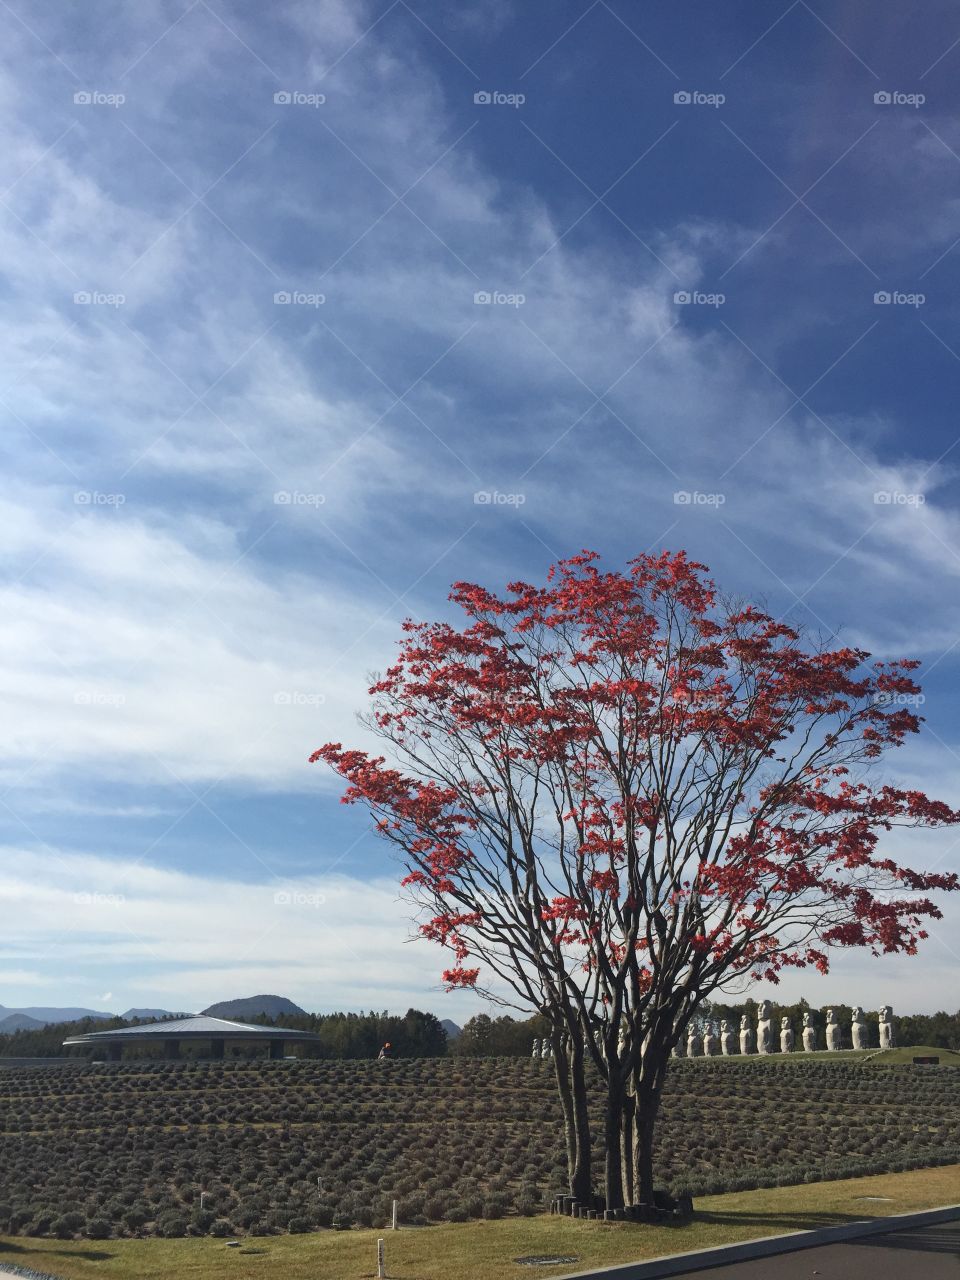 lt's japanese autumn.
The autumn leaves are so red!
Sky is clear blue.
